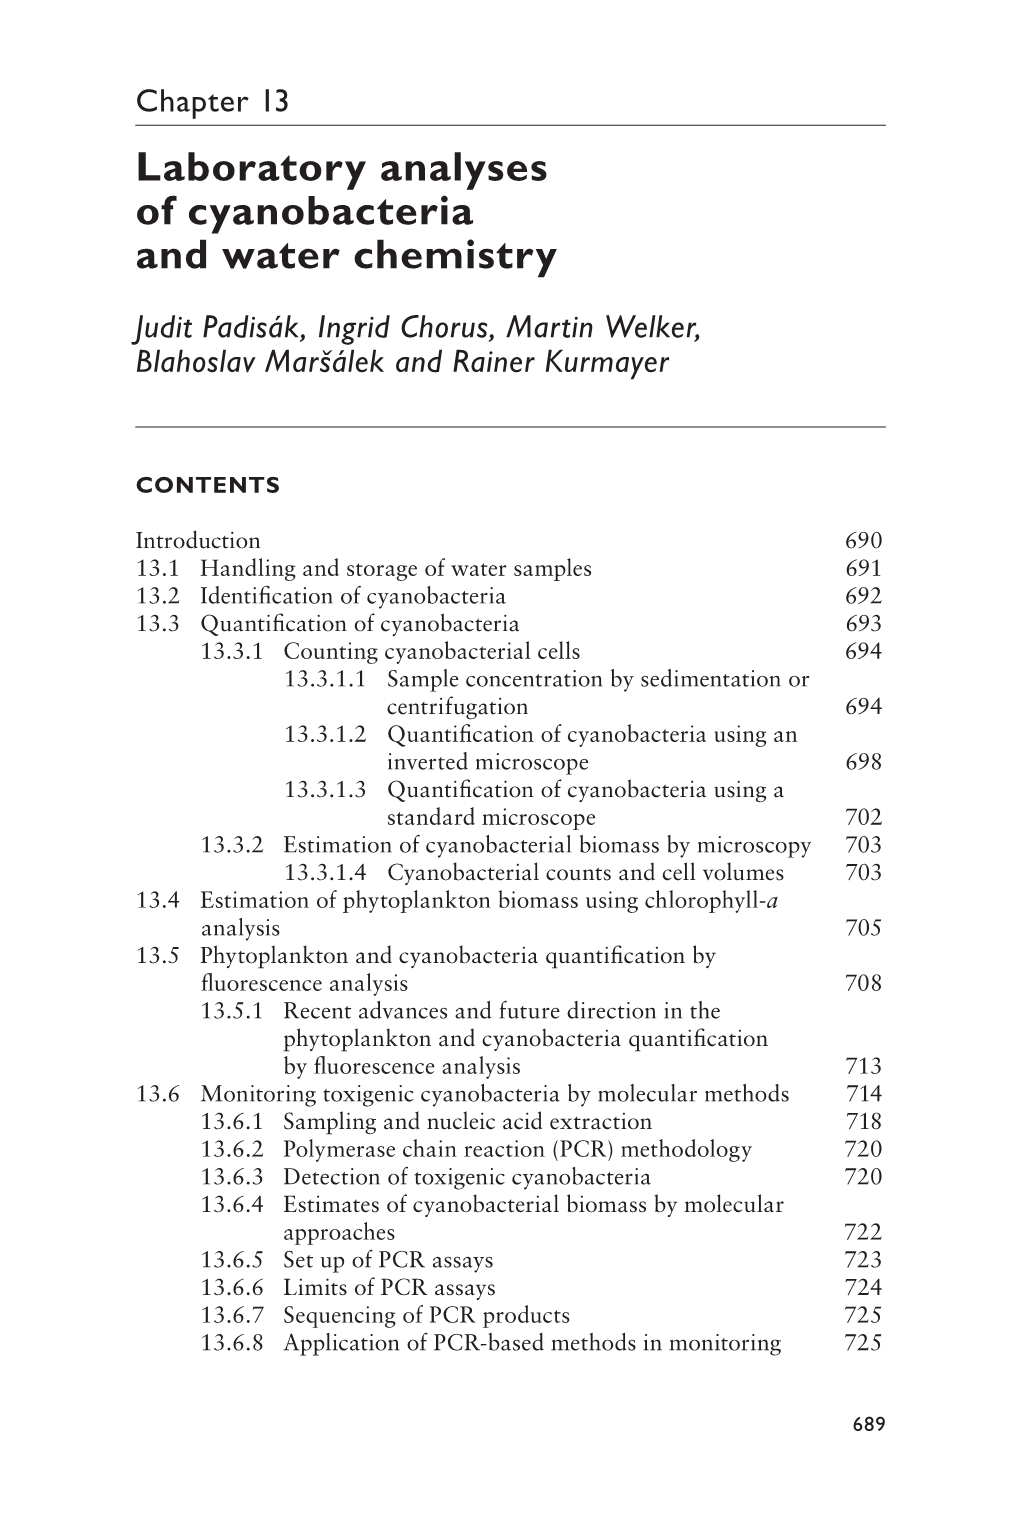 Chapter 13 Laboratory Analyses of Cyanobacteria and Water Chemistry